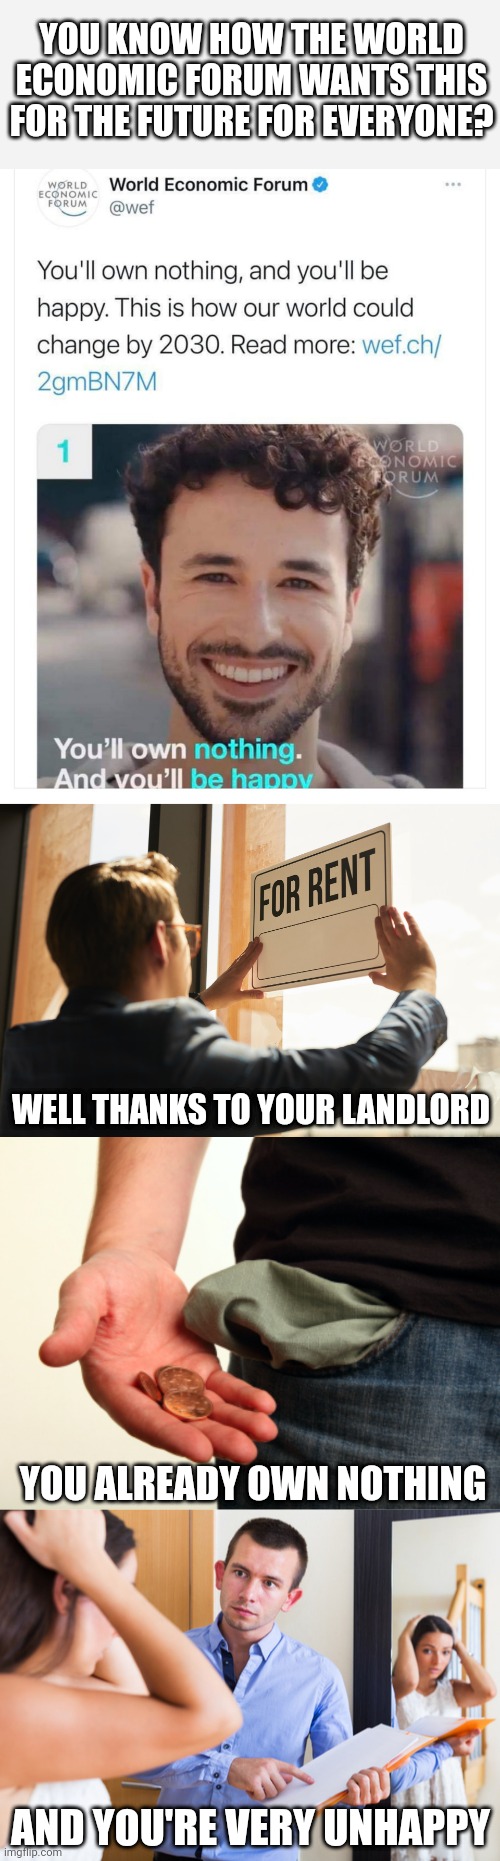 The elites at the World Economic Forum want to be the landlords of the whole planet | YOU KNOW HOW THE WORLD ECONOMIC FORUM WANTS THIS FOR THE FUTURE FOR EVERYONE? WELL THANKS TO YOUR LANDLORD; YOU ALREADY OWN NOTHING; AND YOU'RE VERY UNHAPPY | image tagged in world economic forum,landlords,rent,class struggle,poverty | made w/ Imgflip meme maker